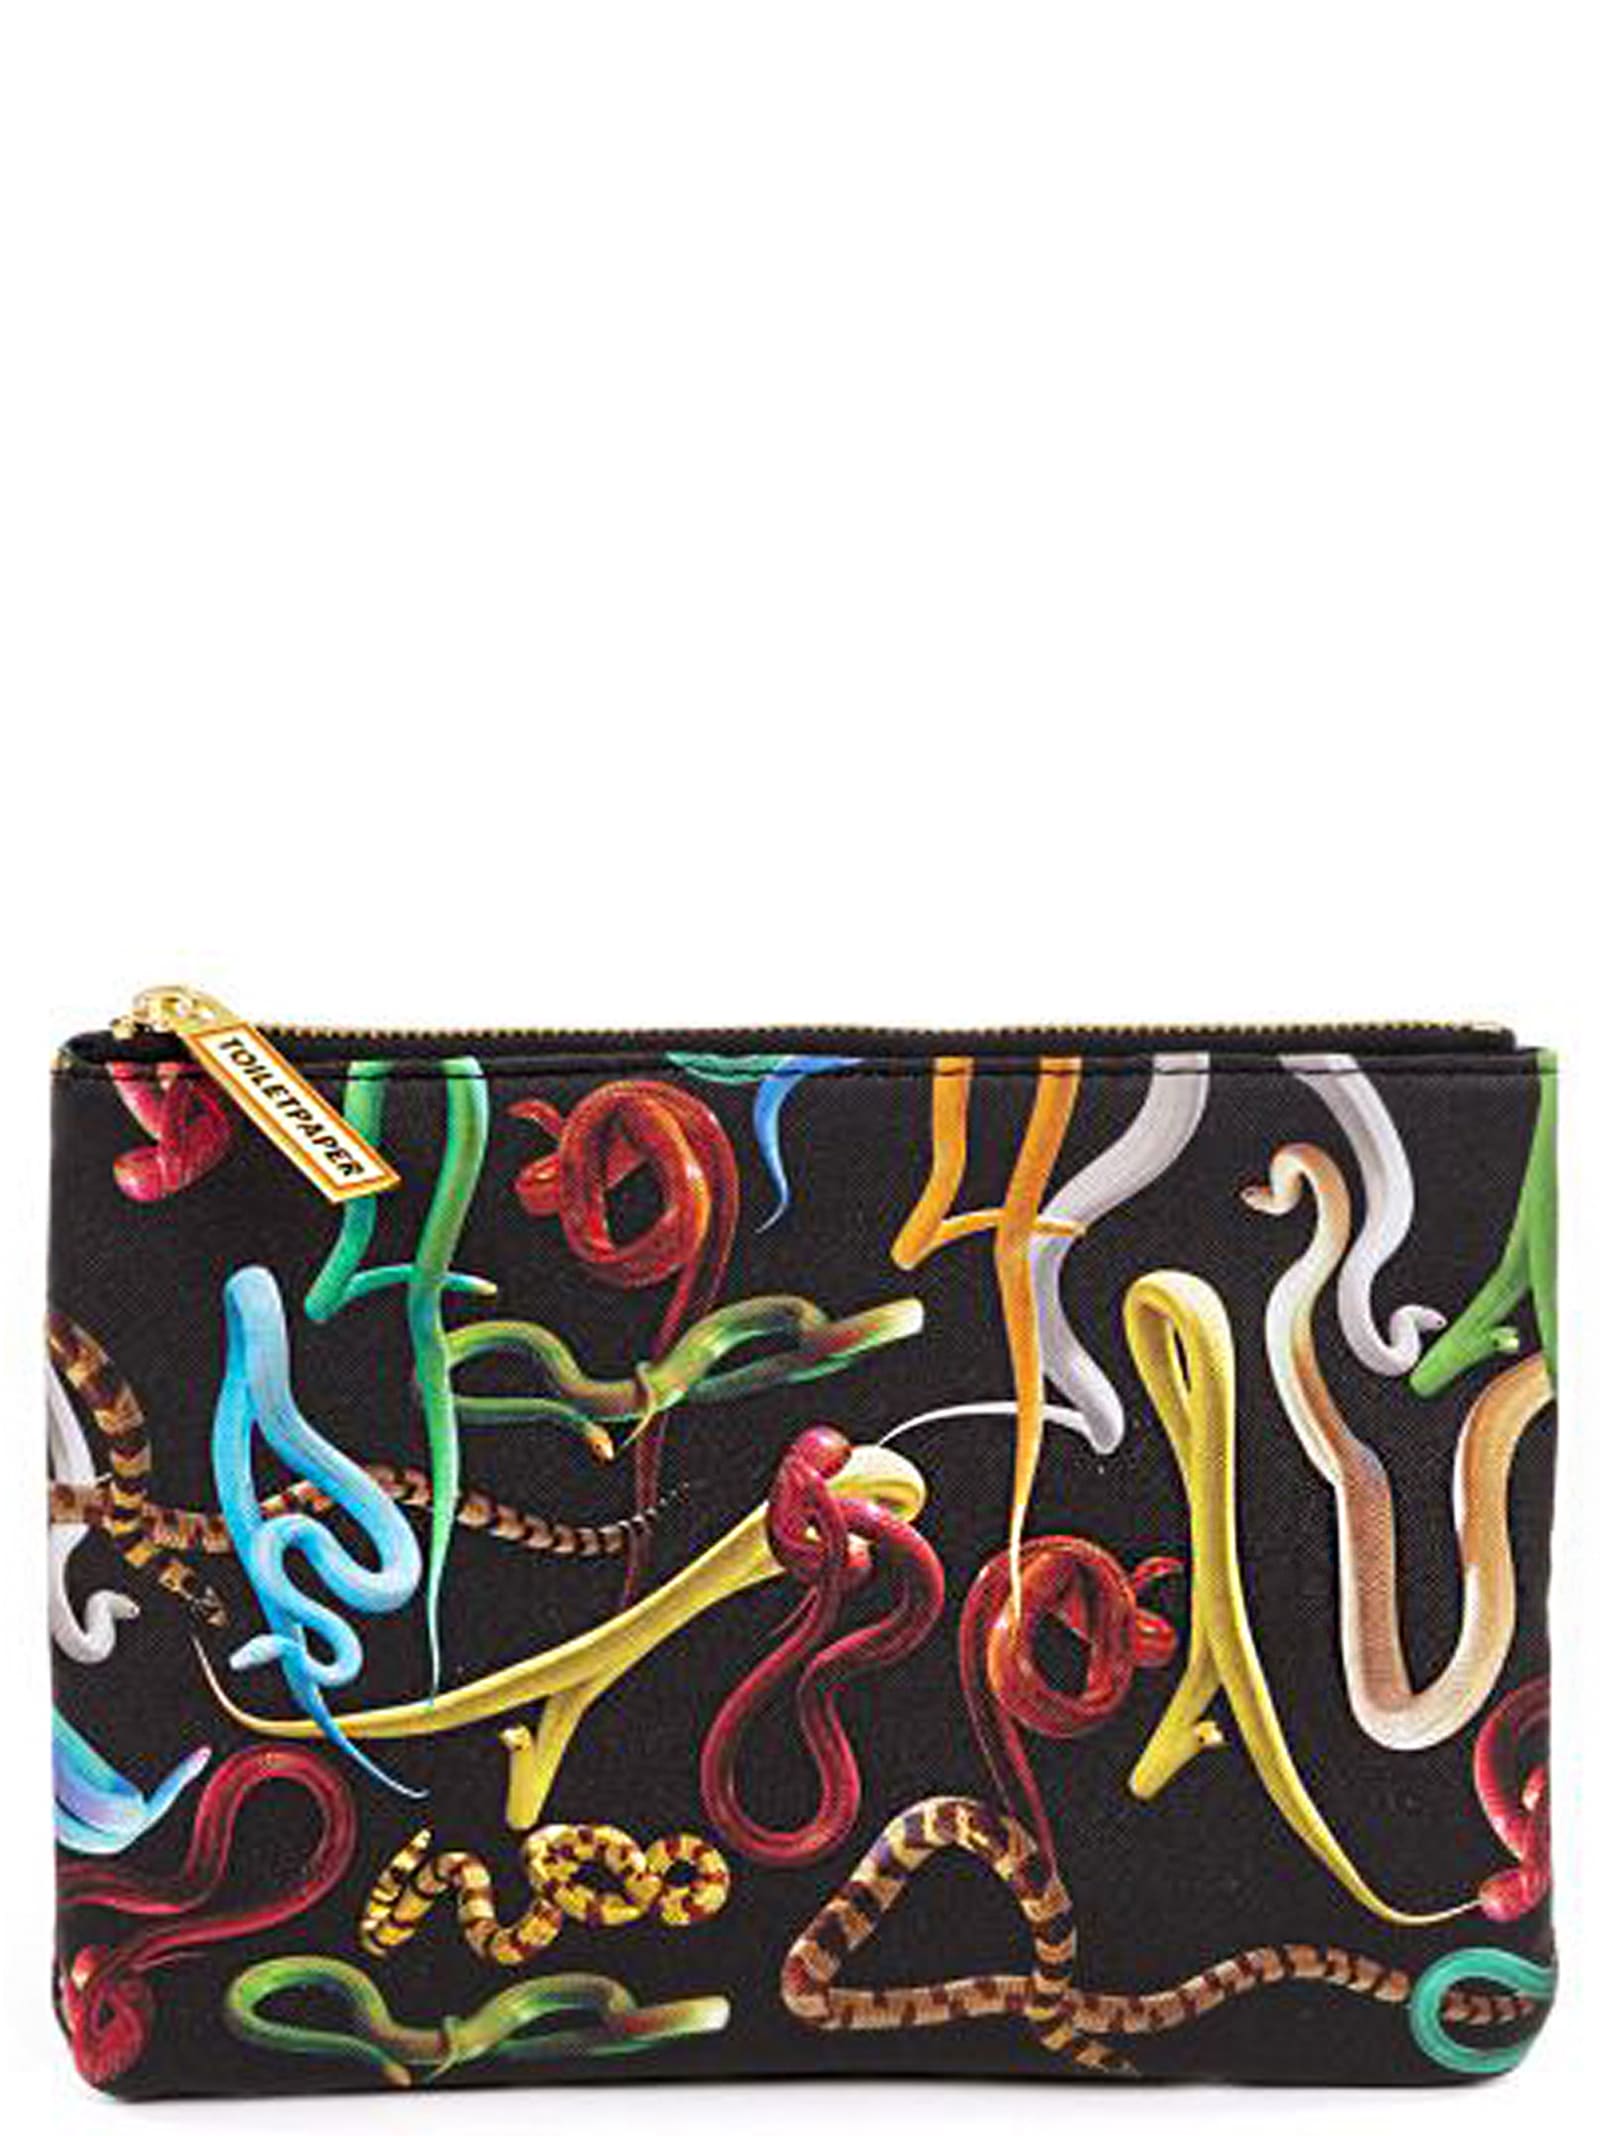 X Toiletpaper snakes Pouch